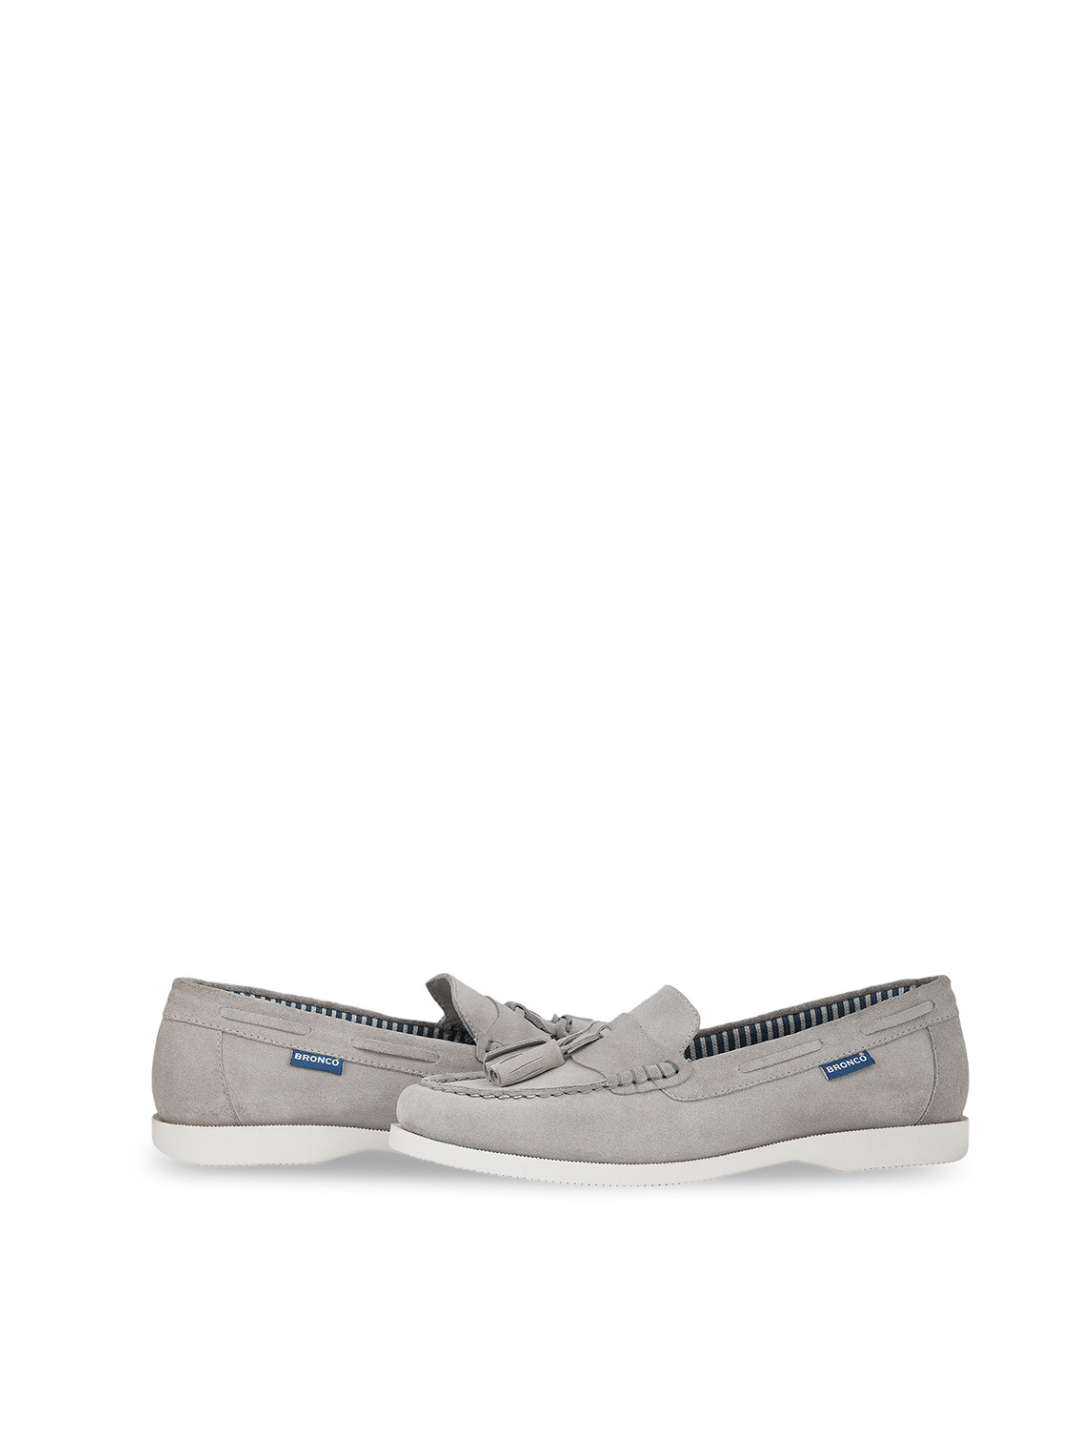 STELLA - Boat shoes, Design & summer collection.